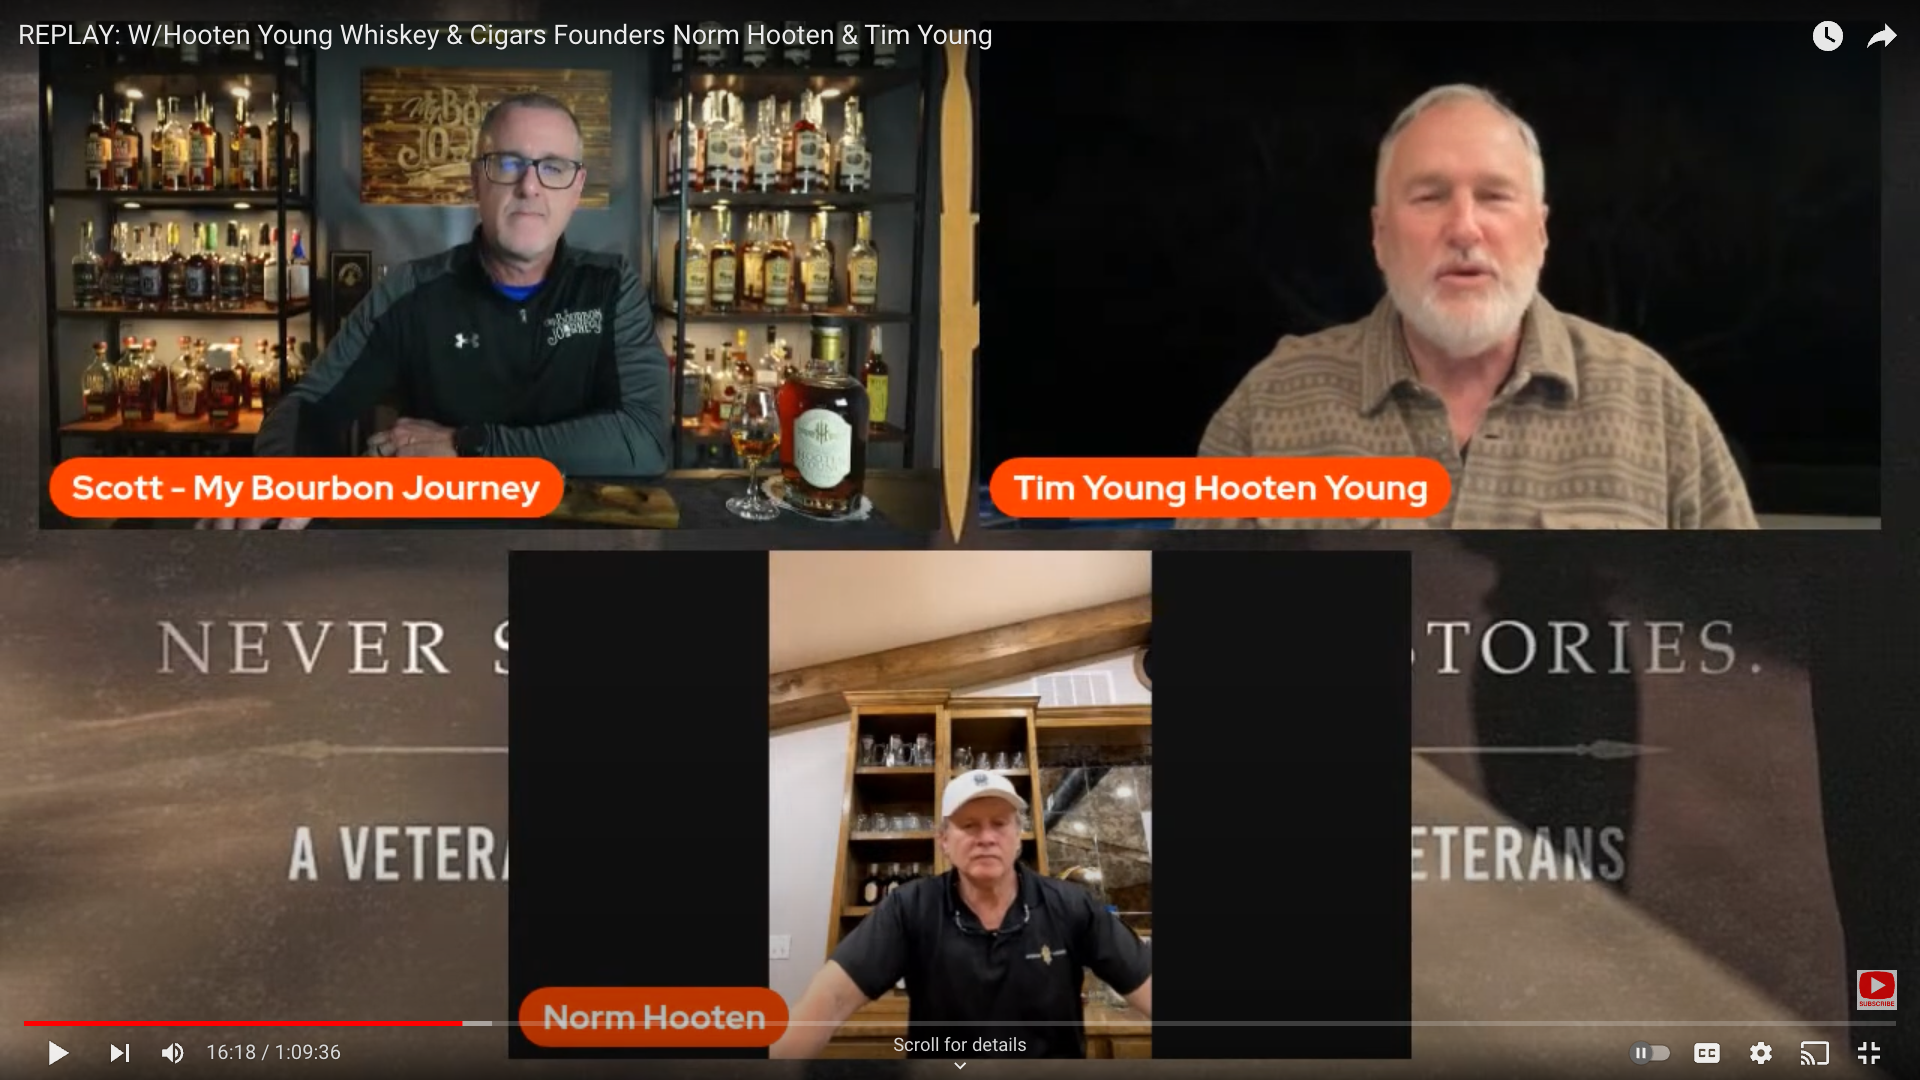 REPLAY: W/Hooten Young Whiskey & Cigars Founders Norm Hooten & Tim Young